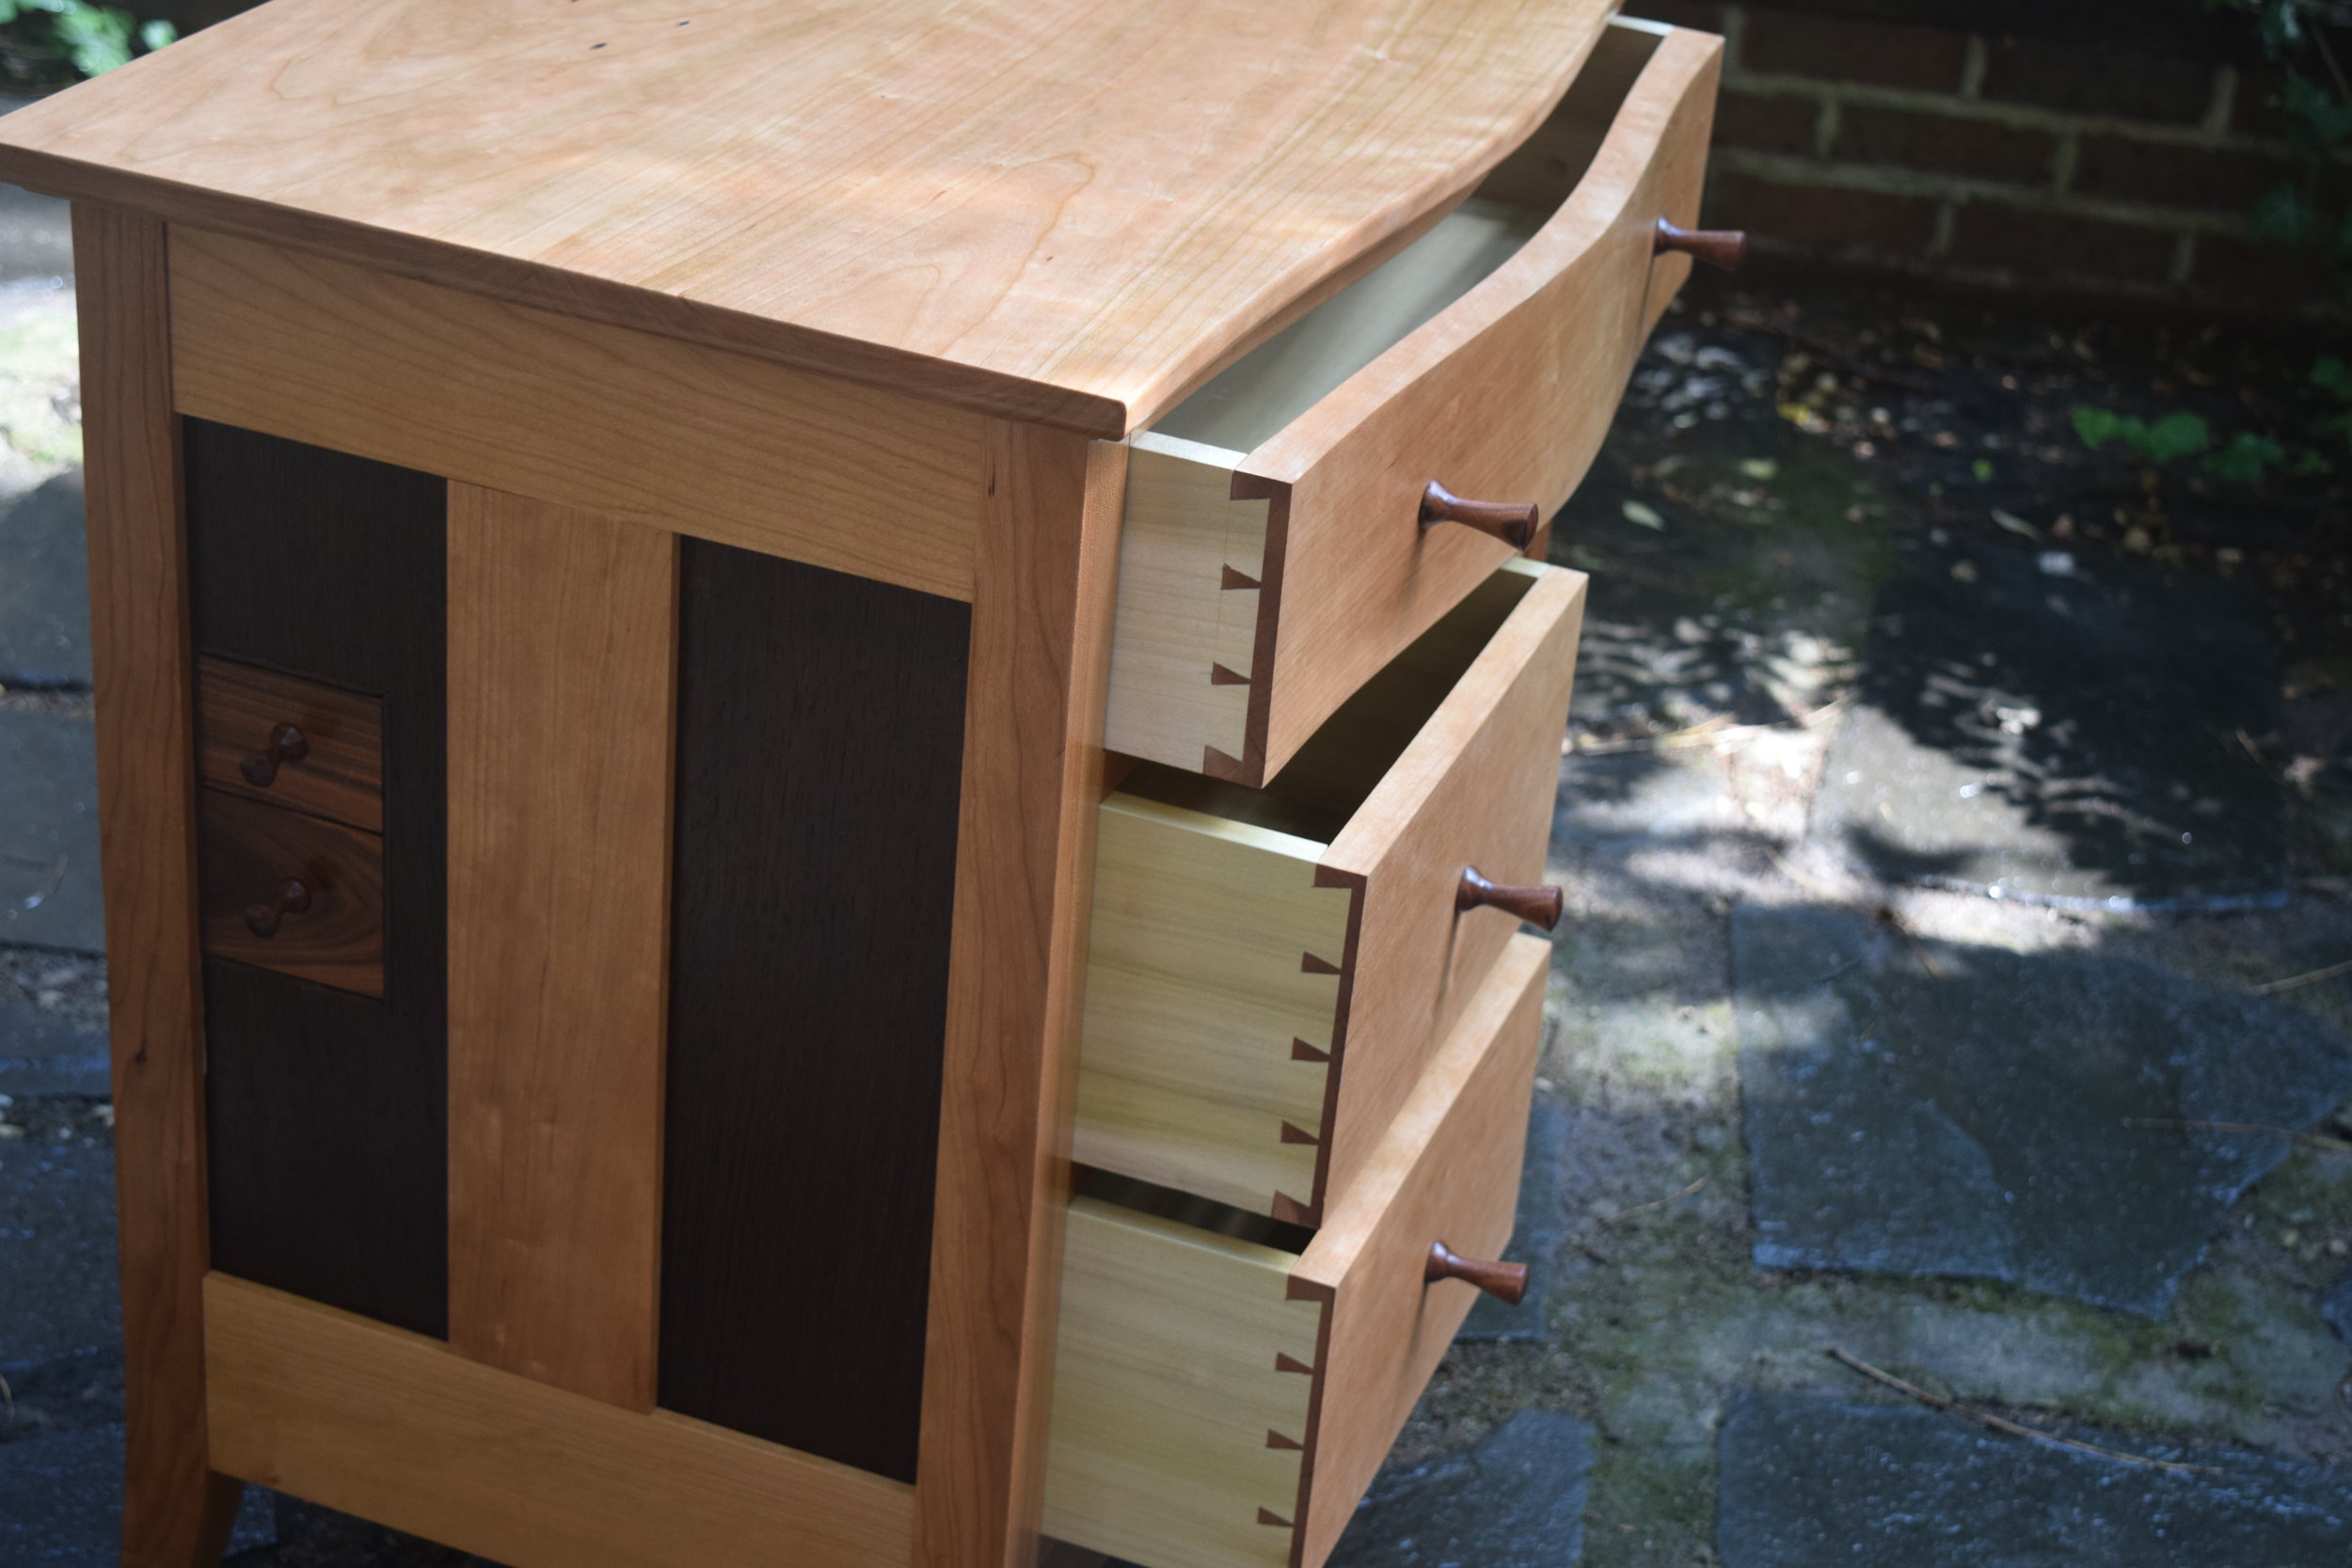   Hand cut dovetails. &nbsp; Each drawer is individually fit to be snug, yet move easily.  